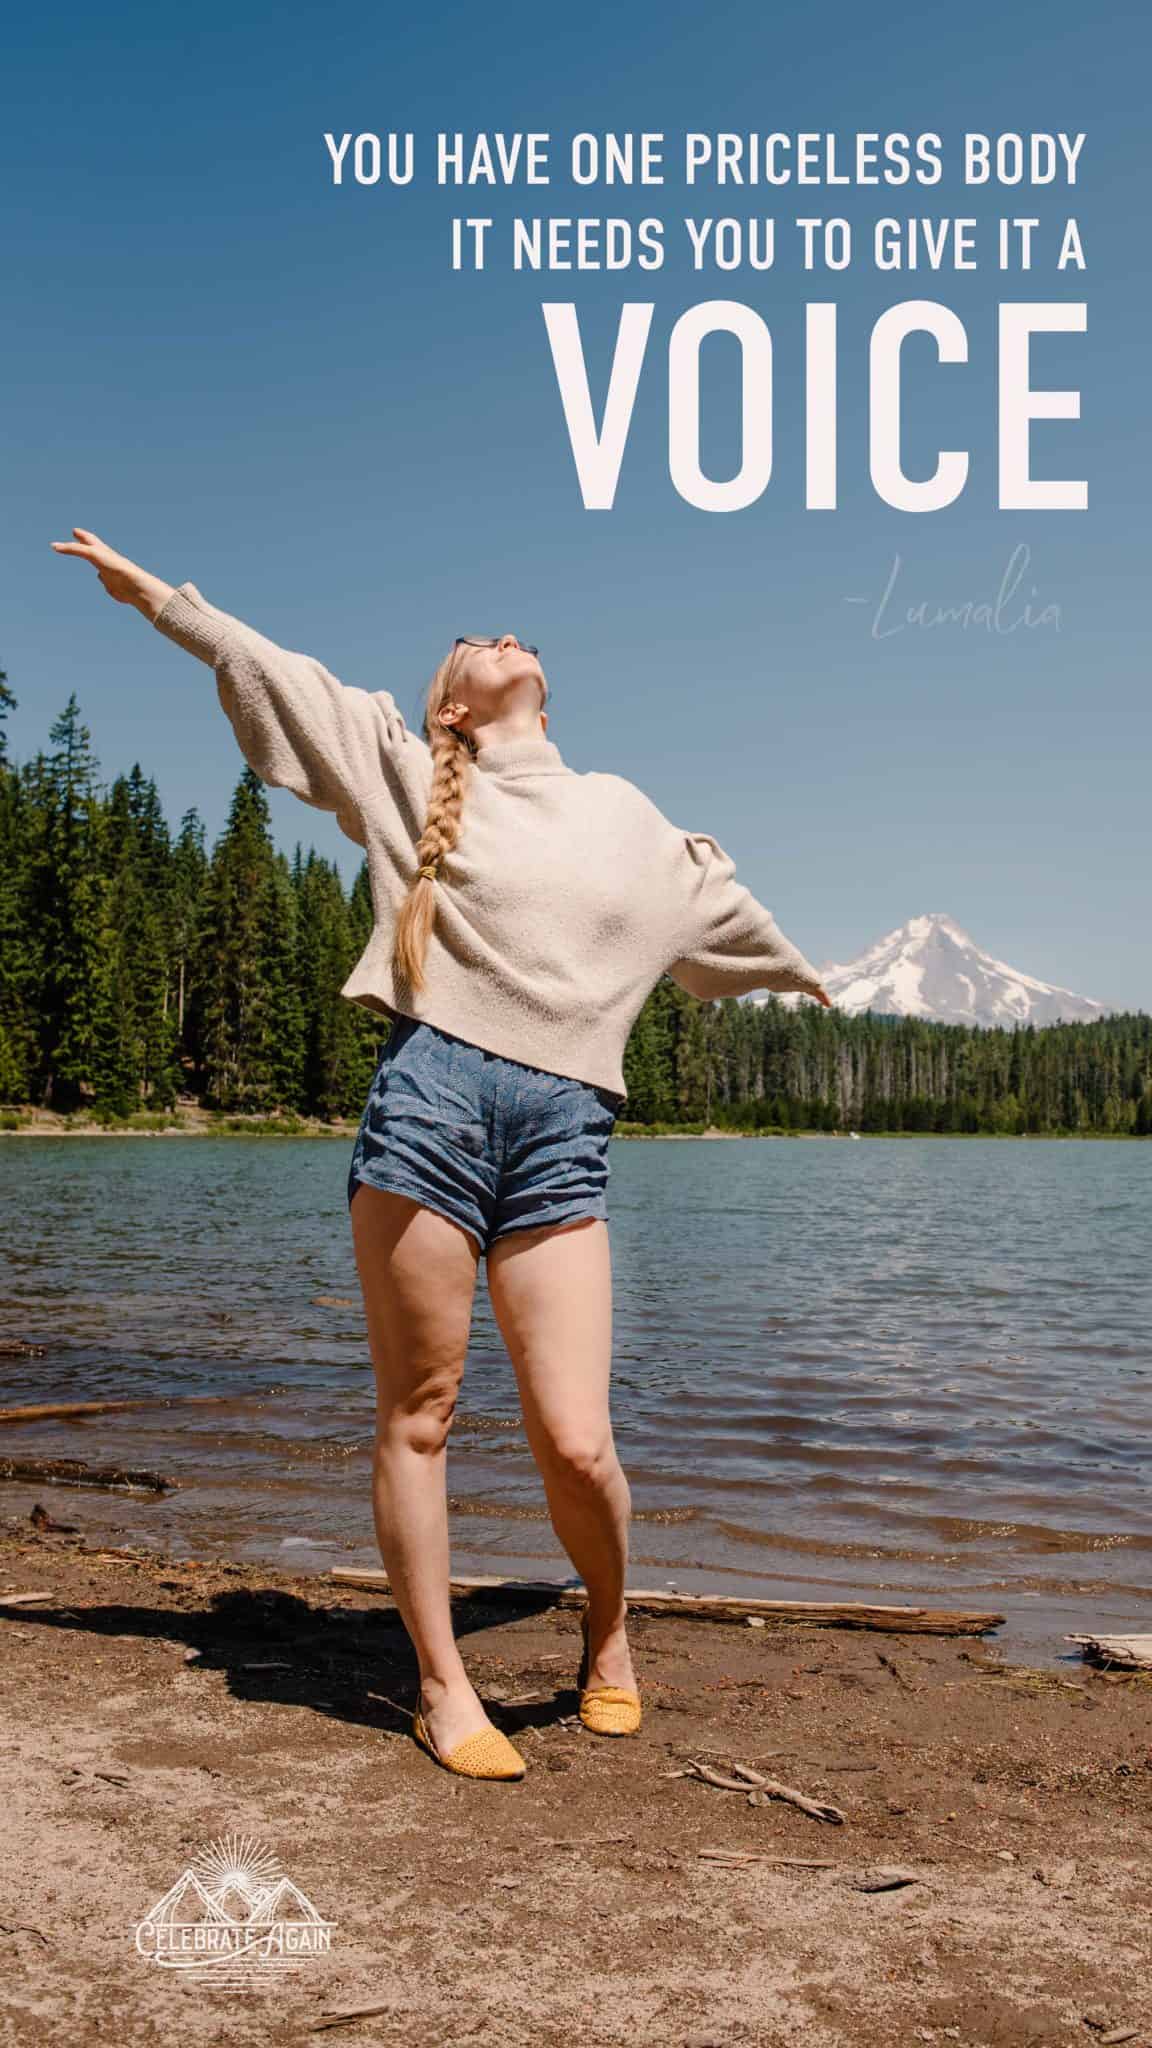 "You have one priceless body it needs you to give it a voice" Lumalia standing by a lake with a mountain in the background cured of chronic illnesses